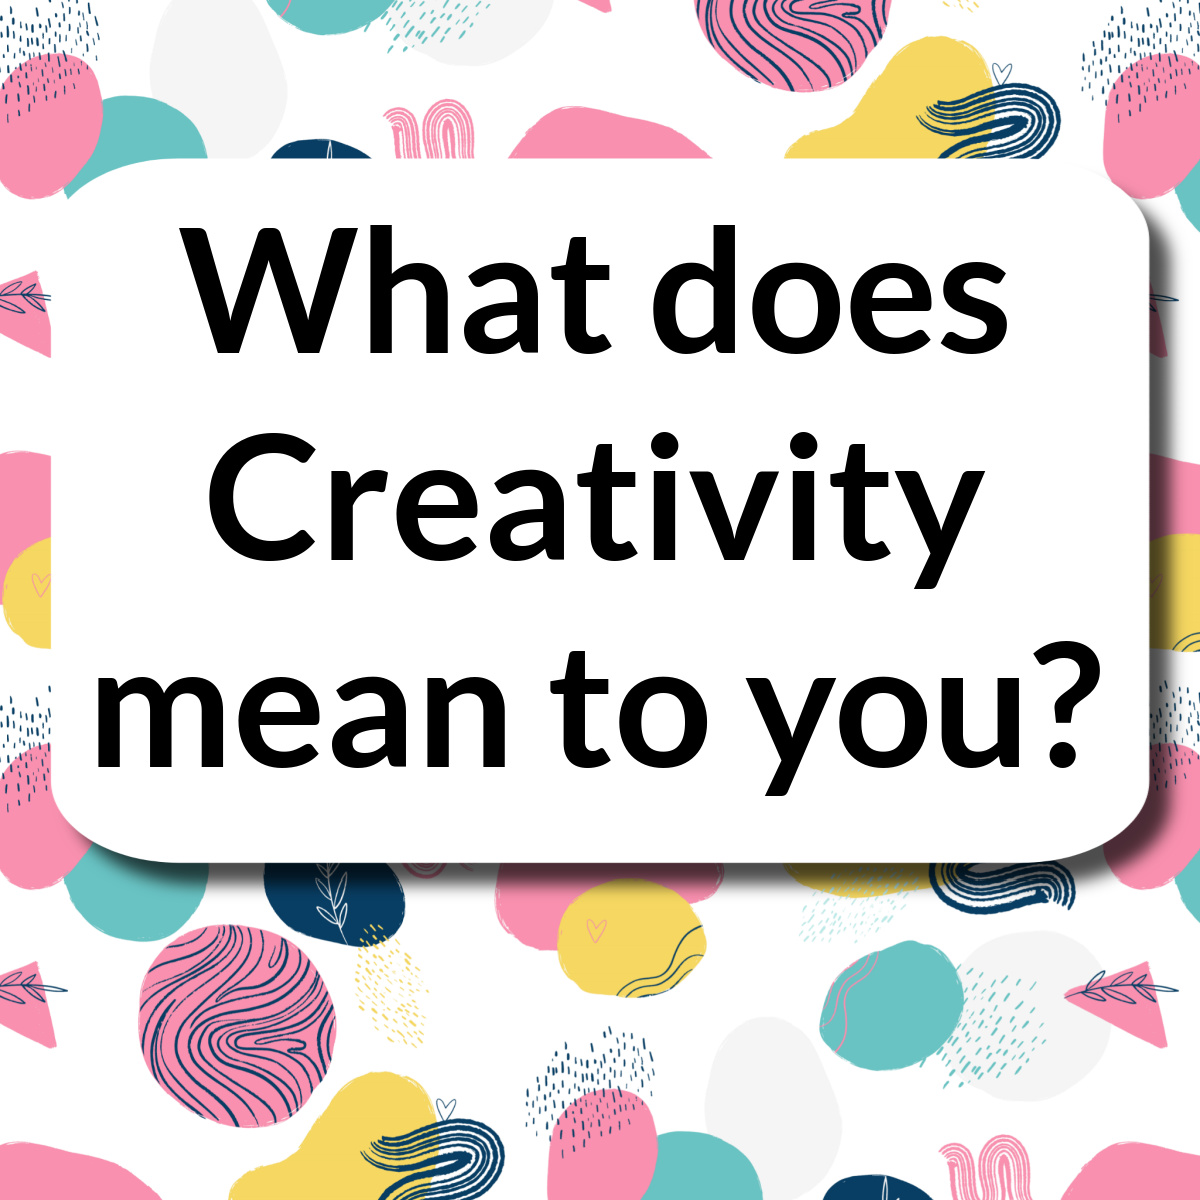 What does creativity mean to you?